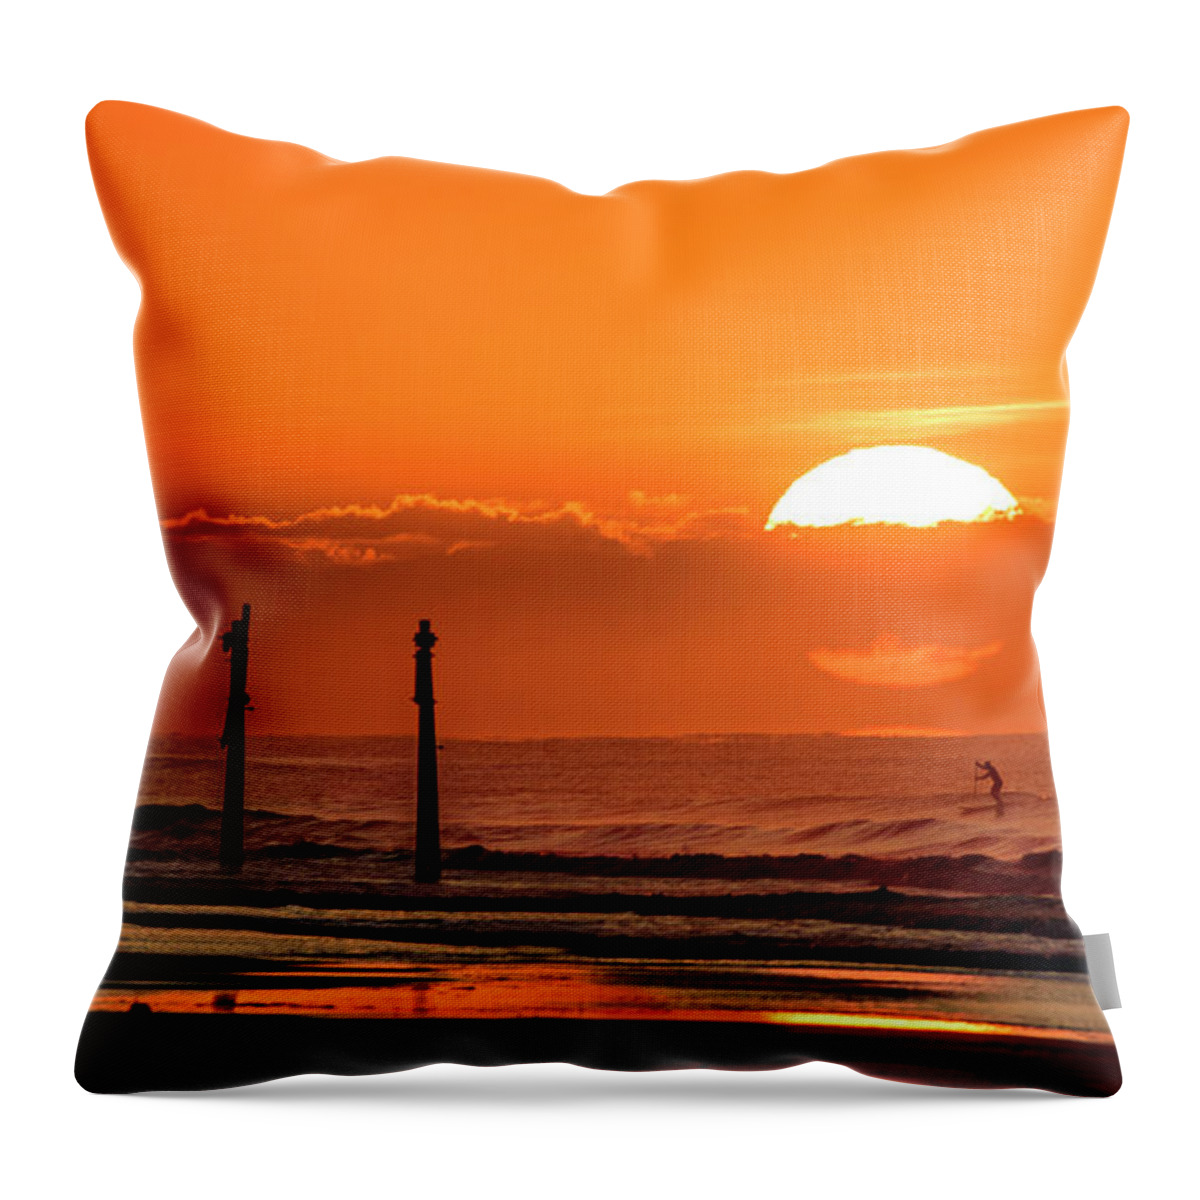 Sunrise Throw Pillow featuring the photograph Paddle Home by DJA Images